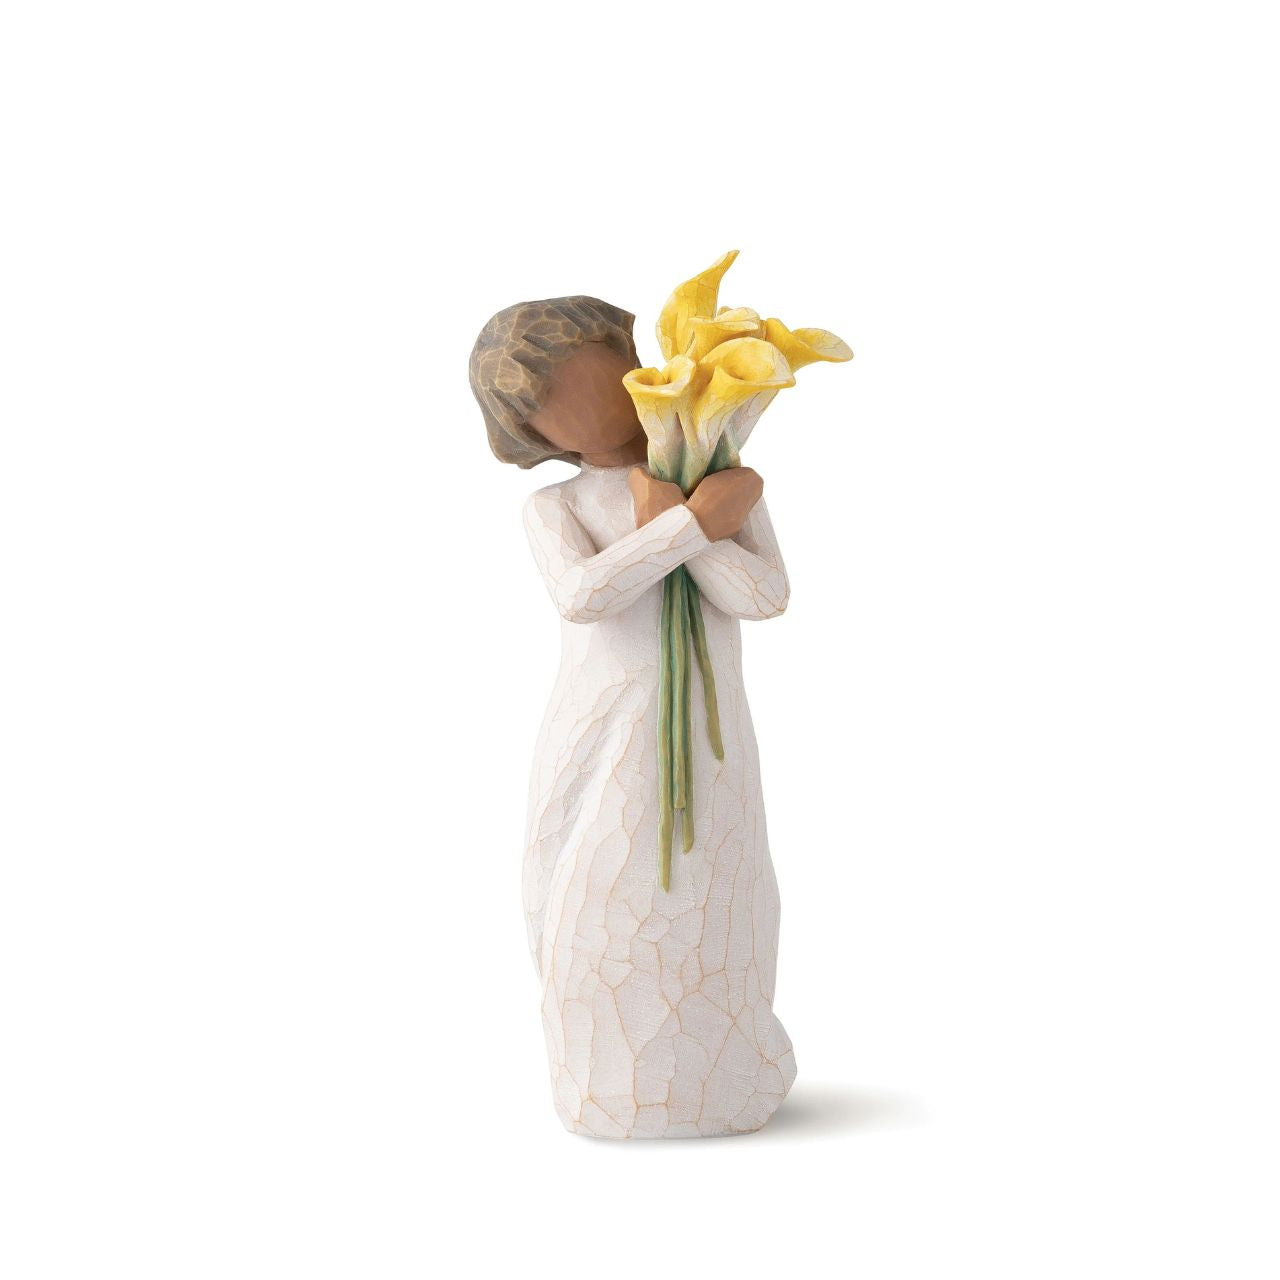 With Gratitude Figurine by Willow Tree  "A gift to say Thank You; to express gratitude to those who care for us, encourage and support us, and surround us with love and joy. A gift to oneself as a reminder to practice gratitude in daily life. And, for those who love flowers and gardening.